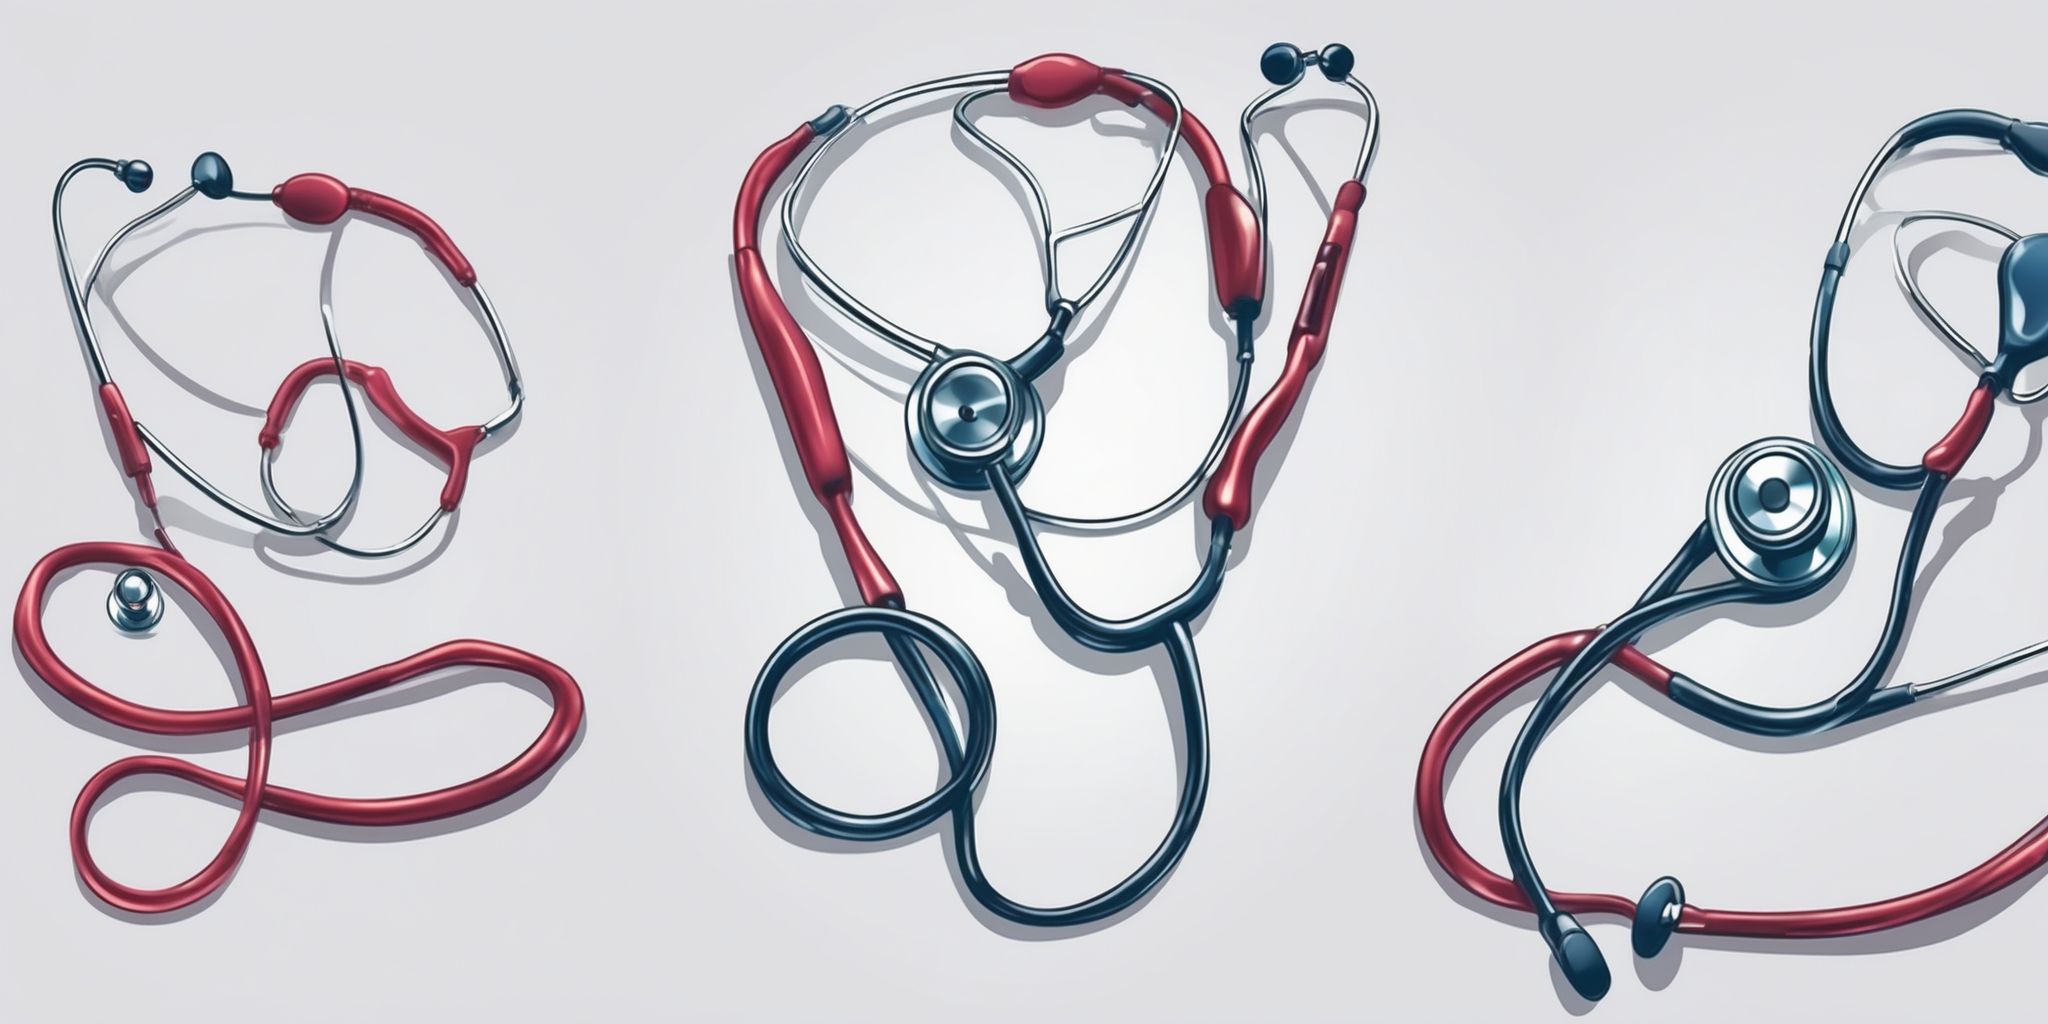 stethoscope in illustration style with gradients and white background